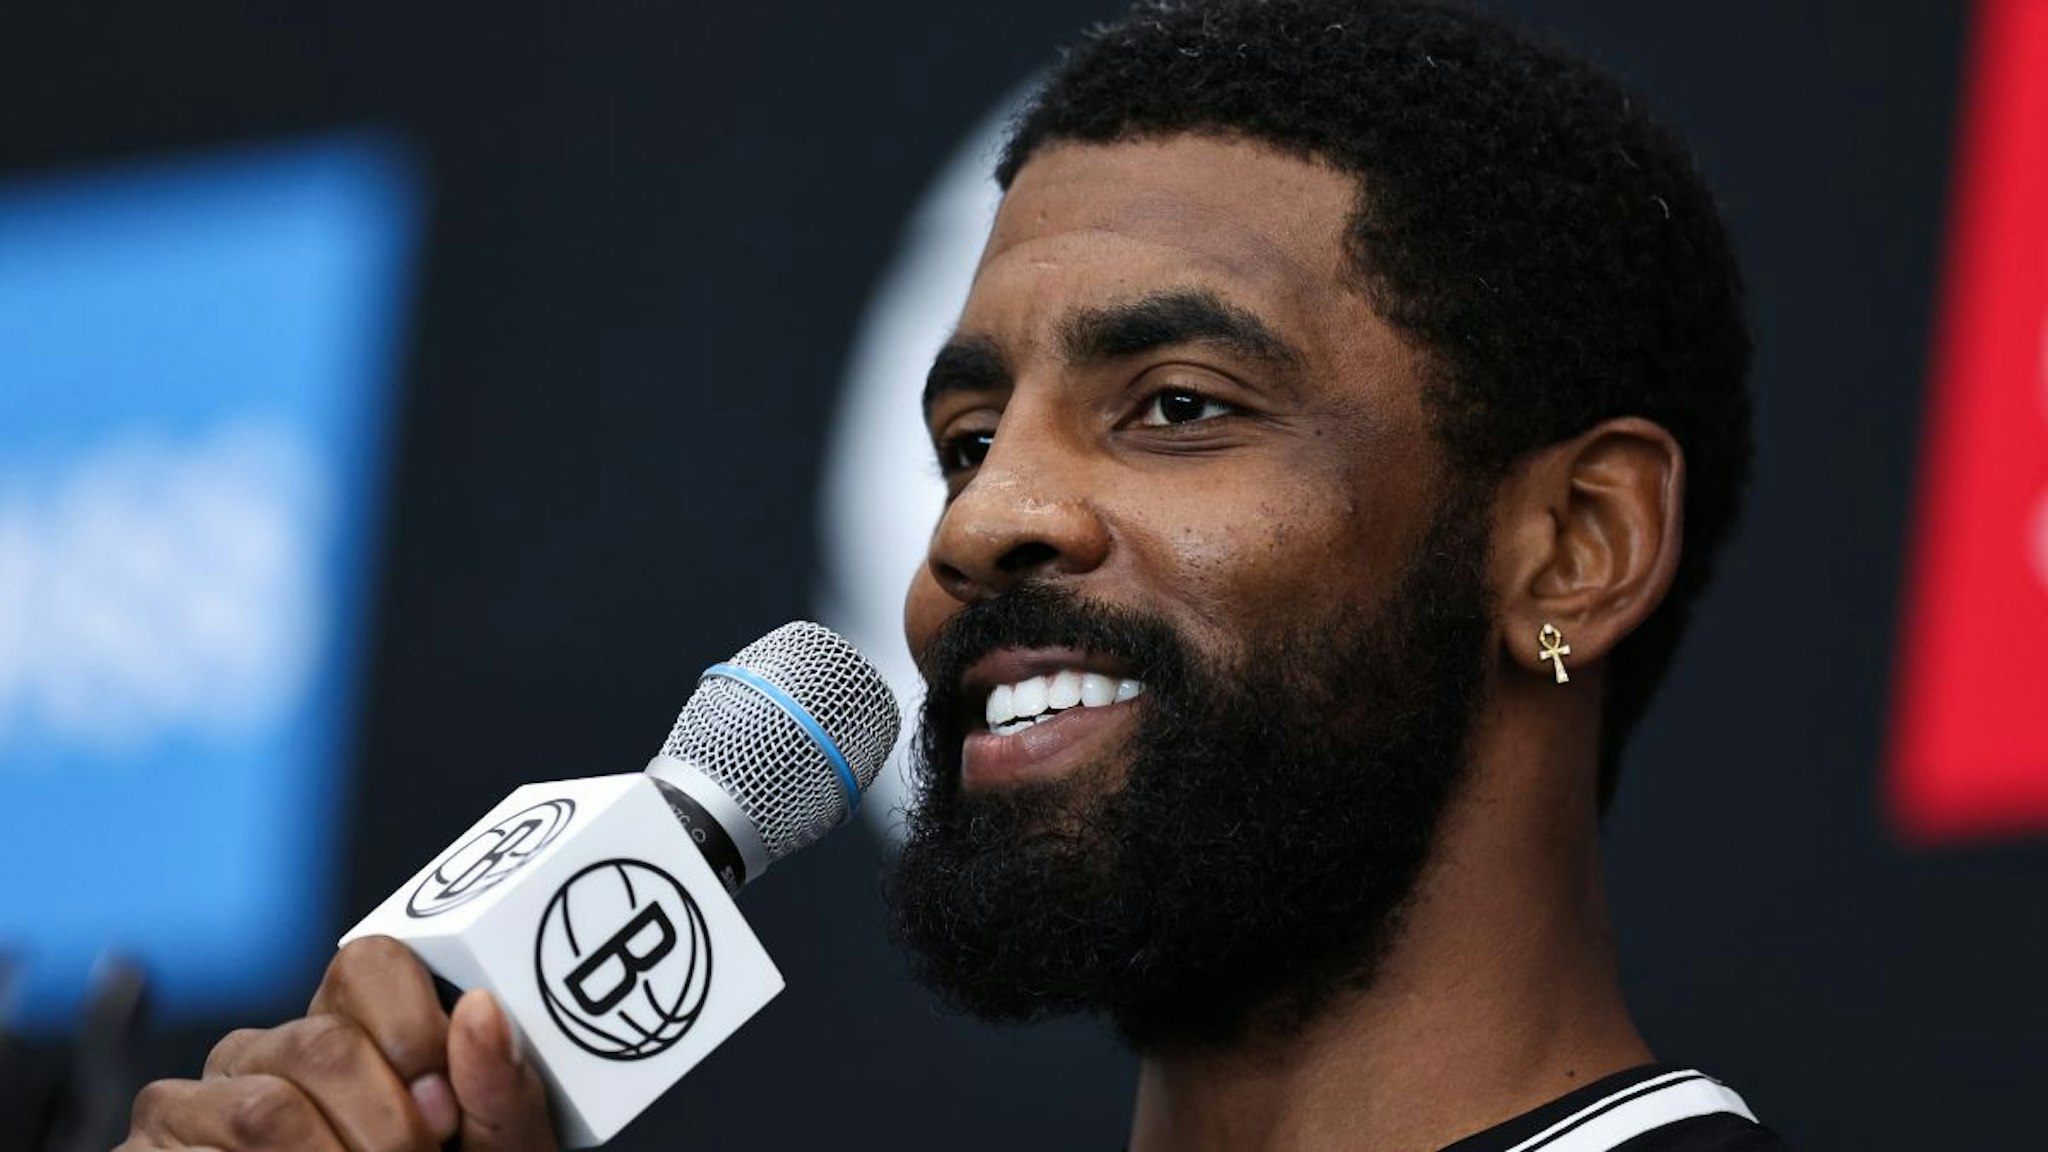 Kyrie Irving #11 of the Brooklyn Nets speaks during a press conference at Brooklyn Nets Media Day at HSS Training Center on September 26, 2022 in the Brooklyn borough of New York City.